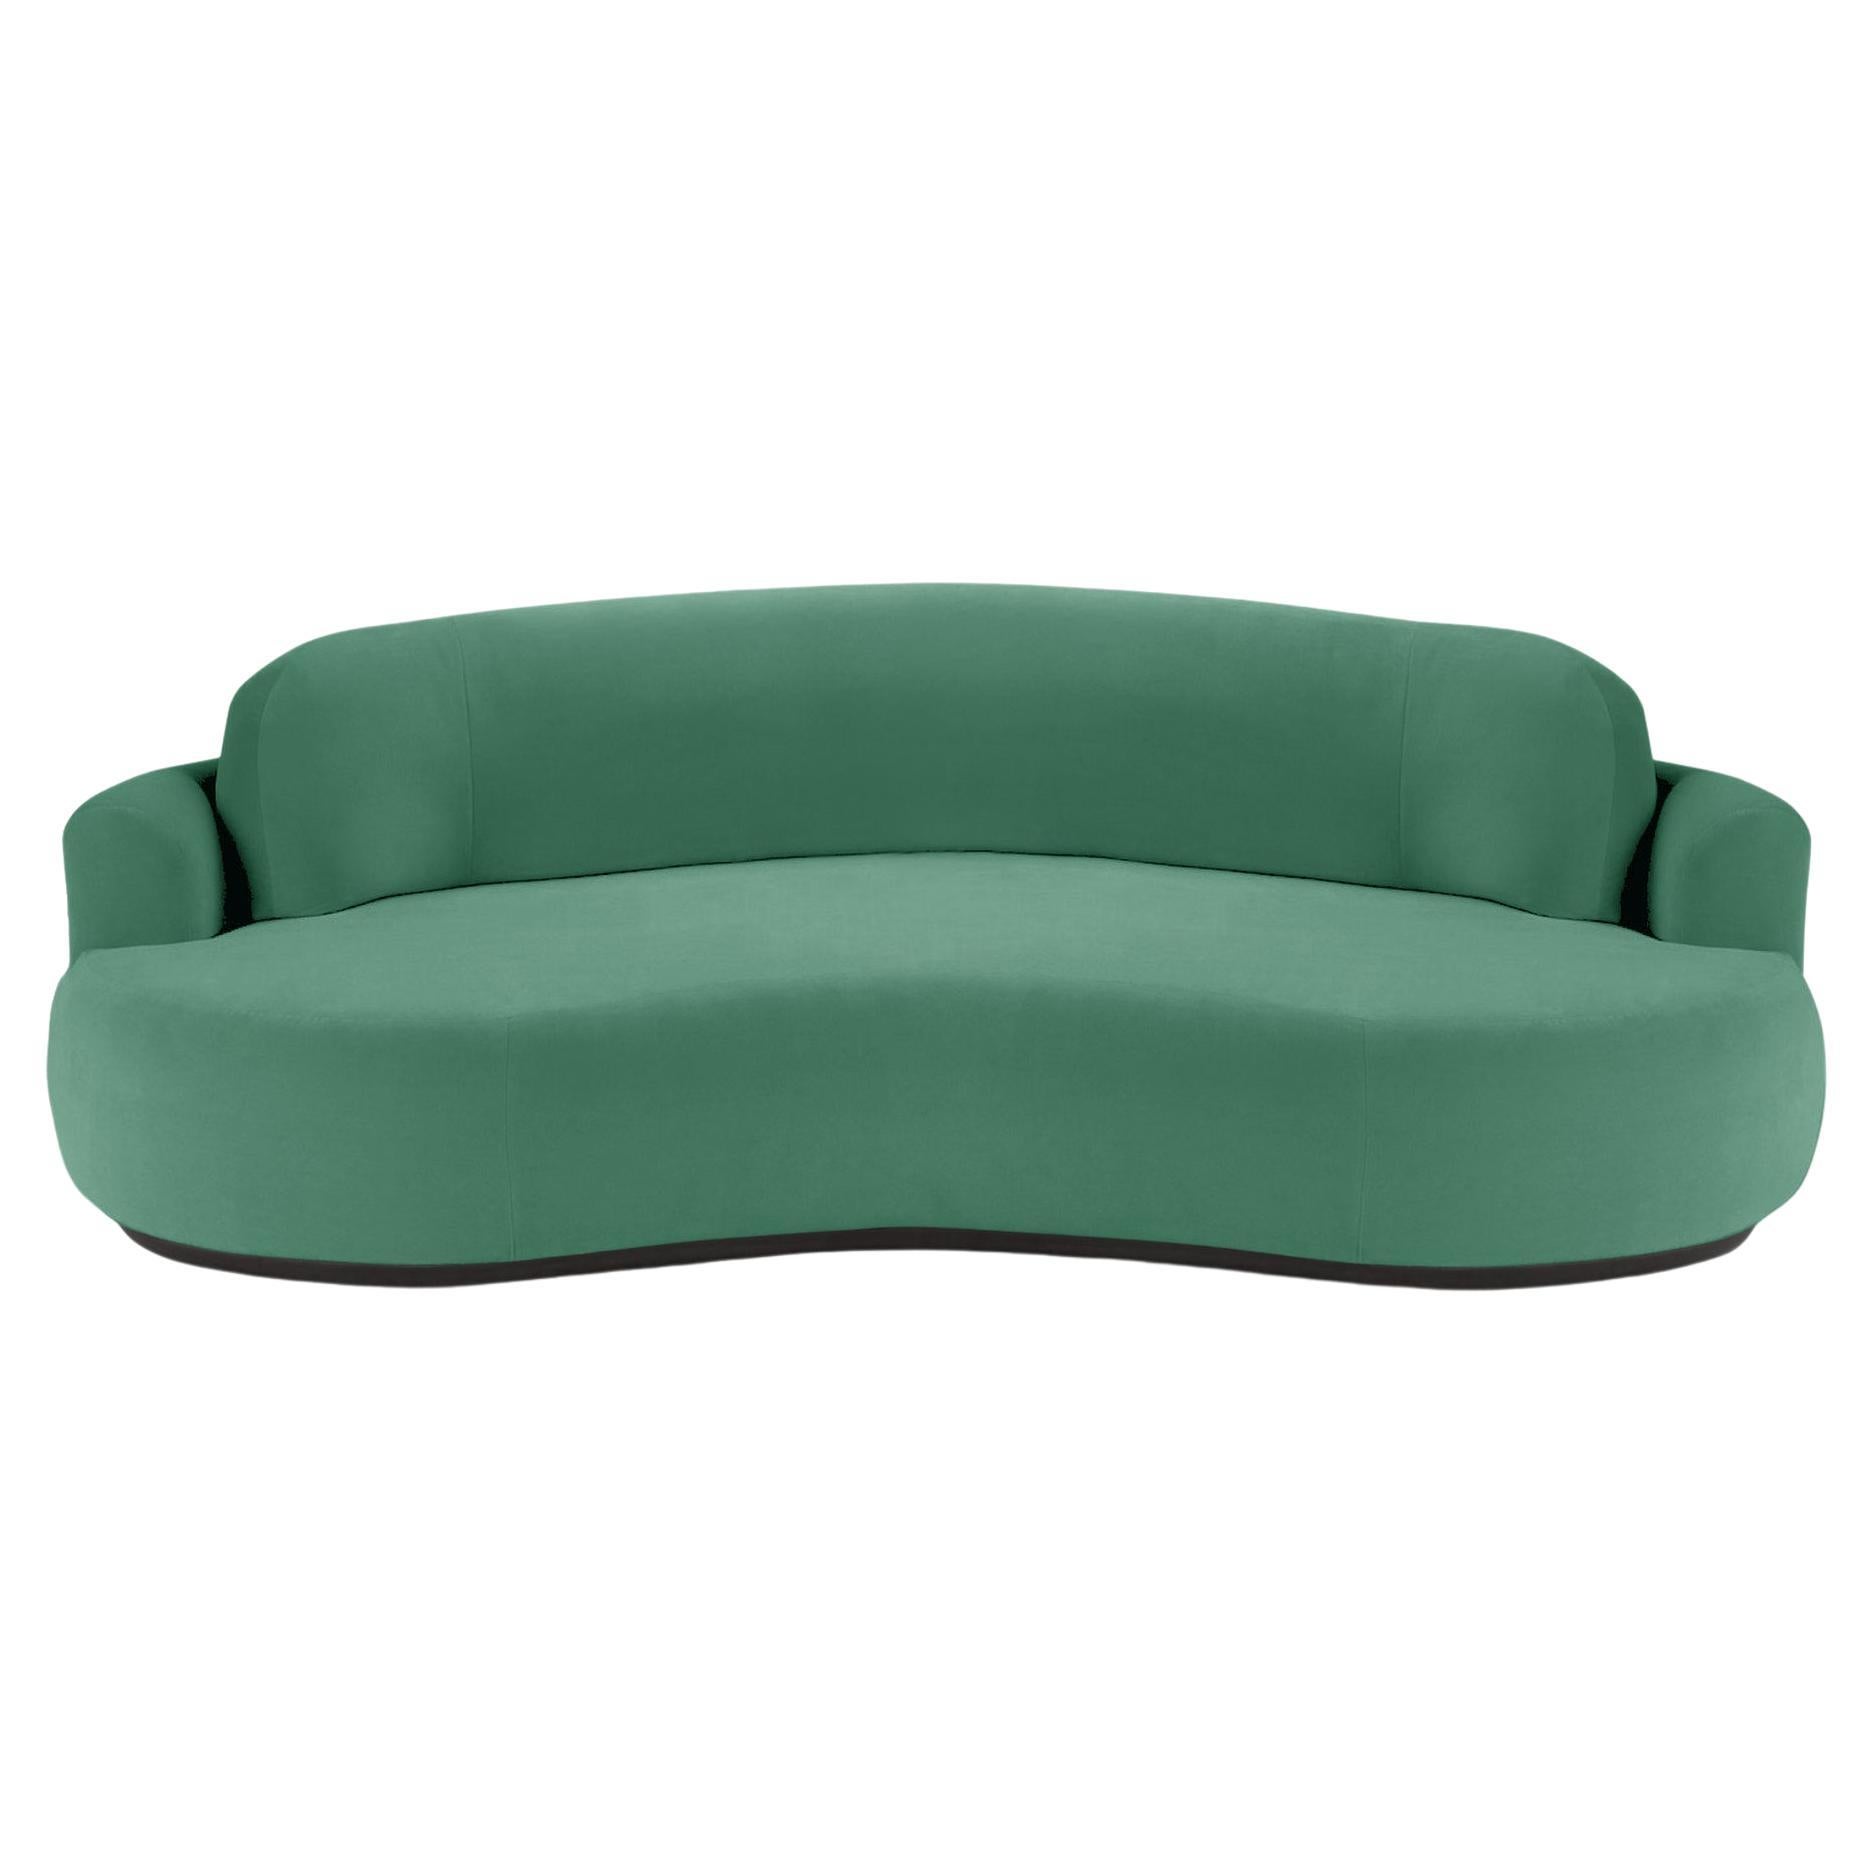 Naked Curved Sofa, Medium with Beech Ash-056-5 and Paris Green